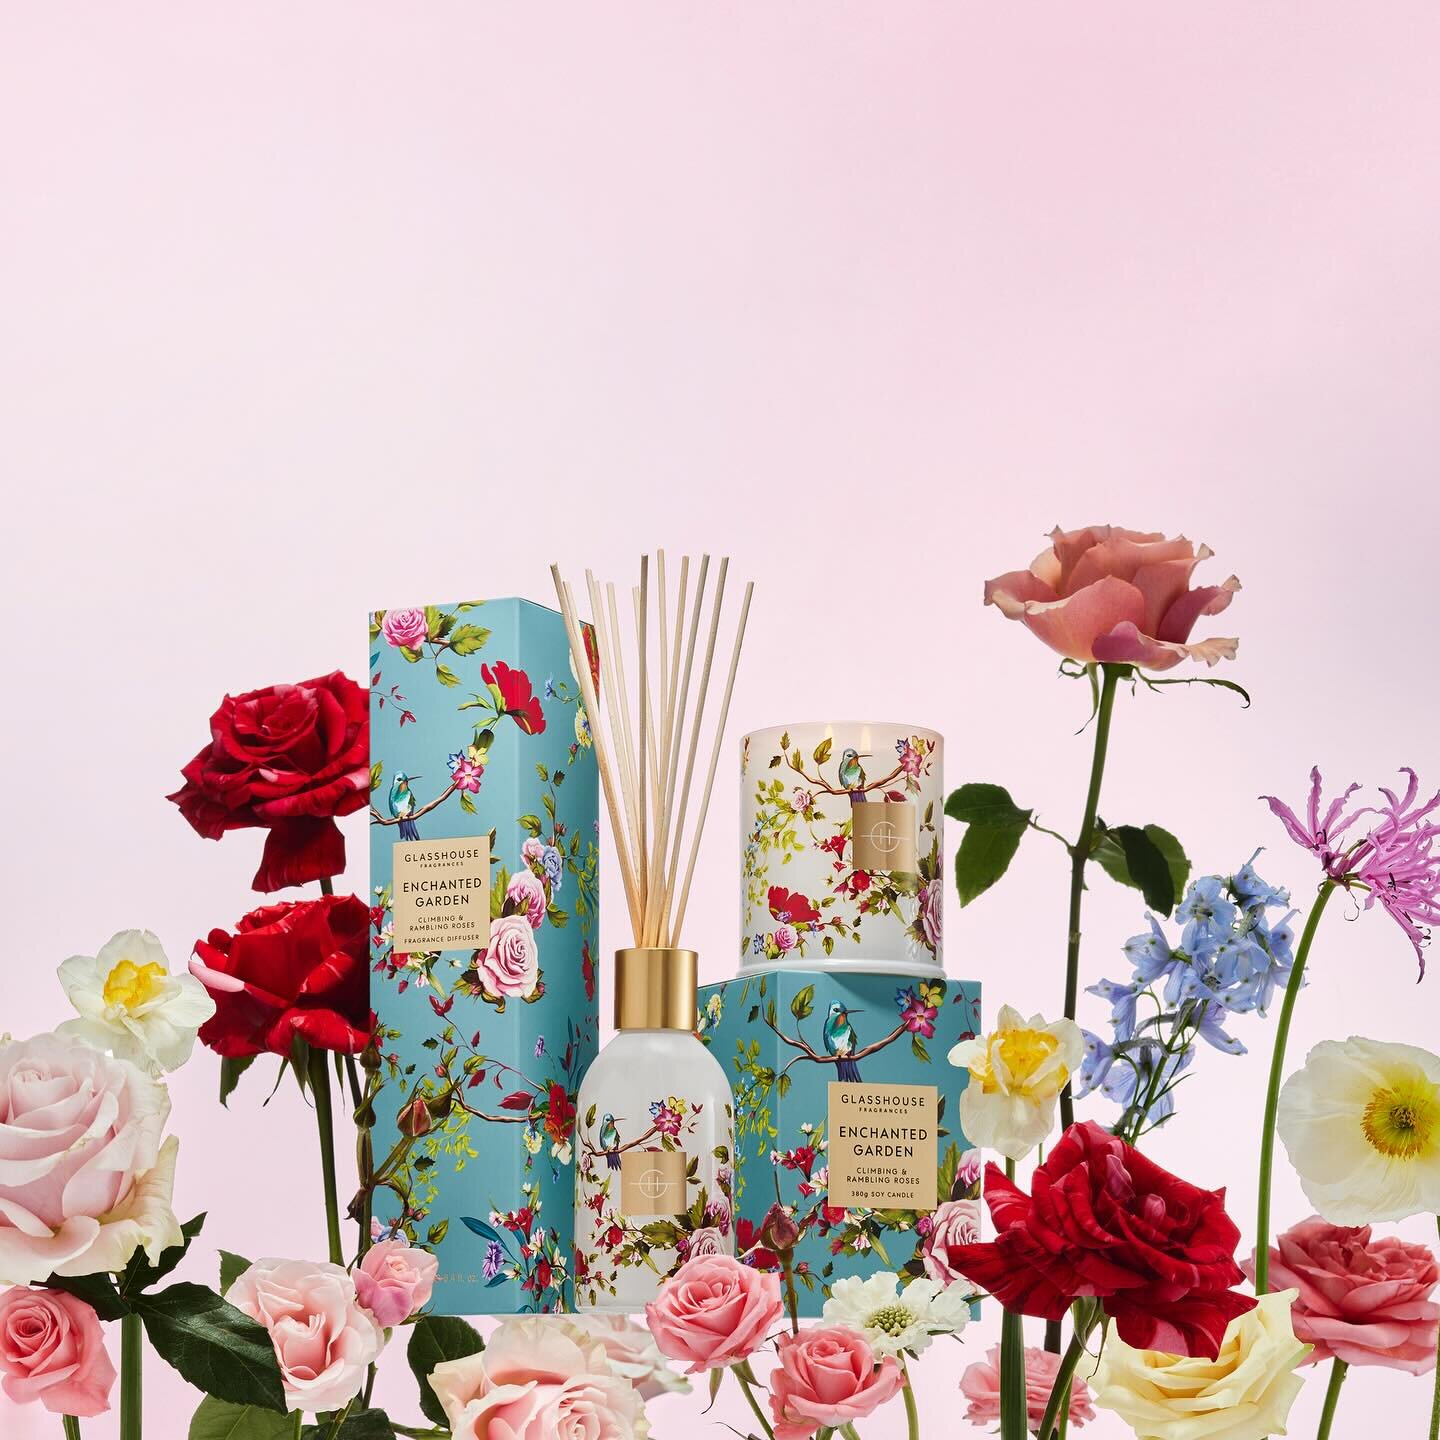 NEW // @glasshousefragrances never fails to mesmerize us, and this Mother&rsquo;s Day Collection Enchanted Garden is no exception&hellip;
The spotlight of the Enchanted Garden Collection is the new limited-edition fragrance, &lsquo;Enchanted Garden.&